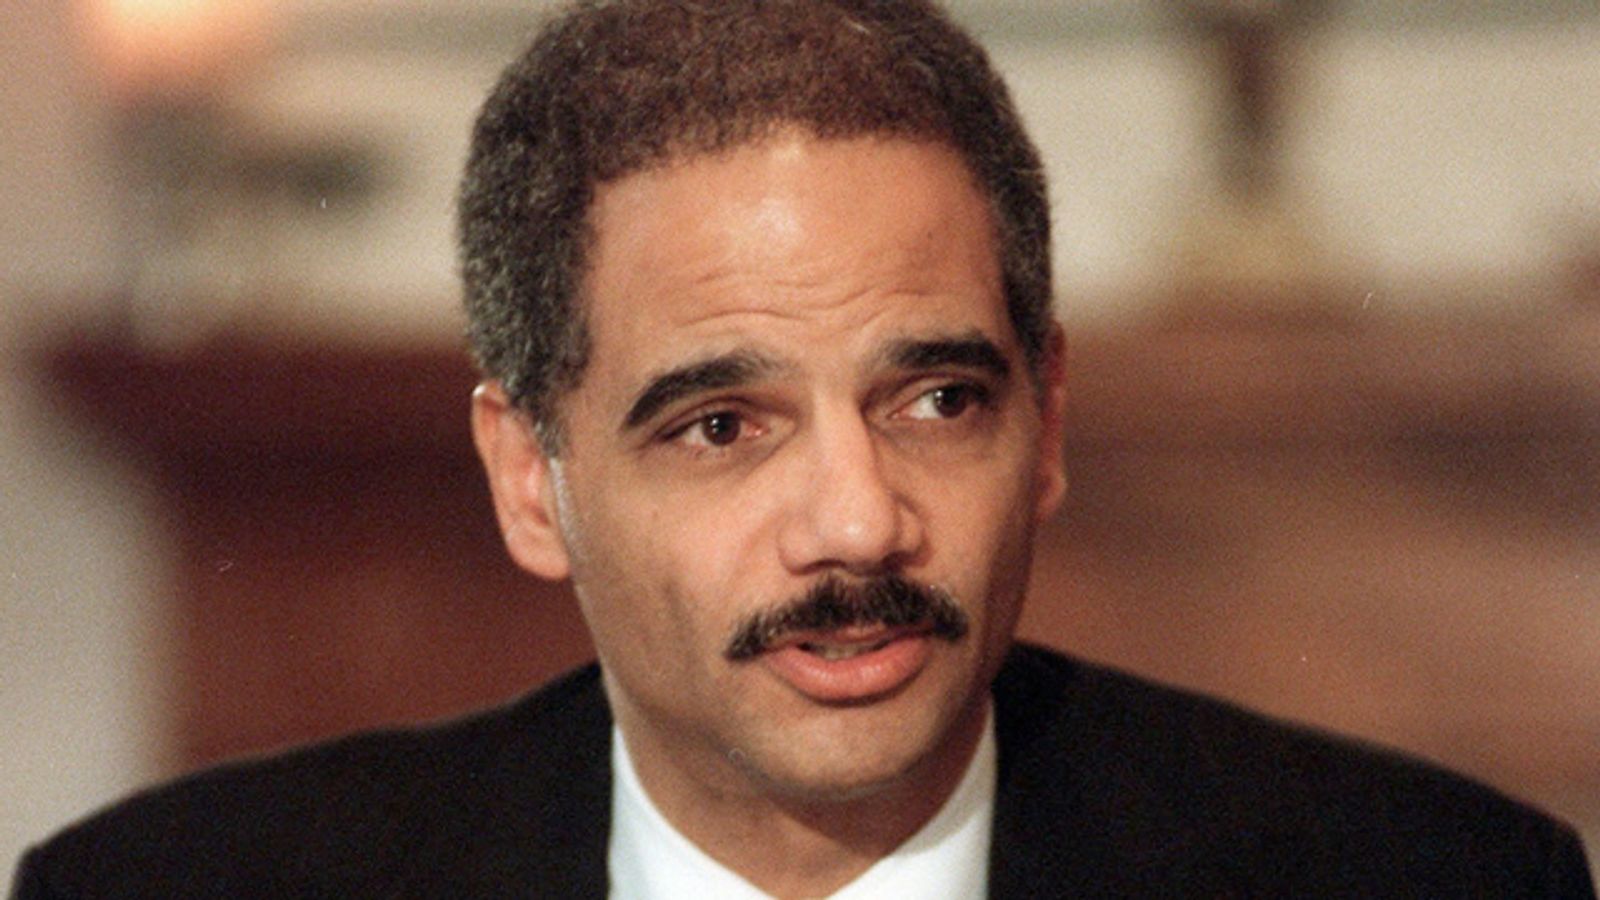 Senate Judiciary Committee Confirms Holder for AG